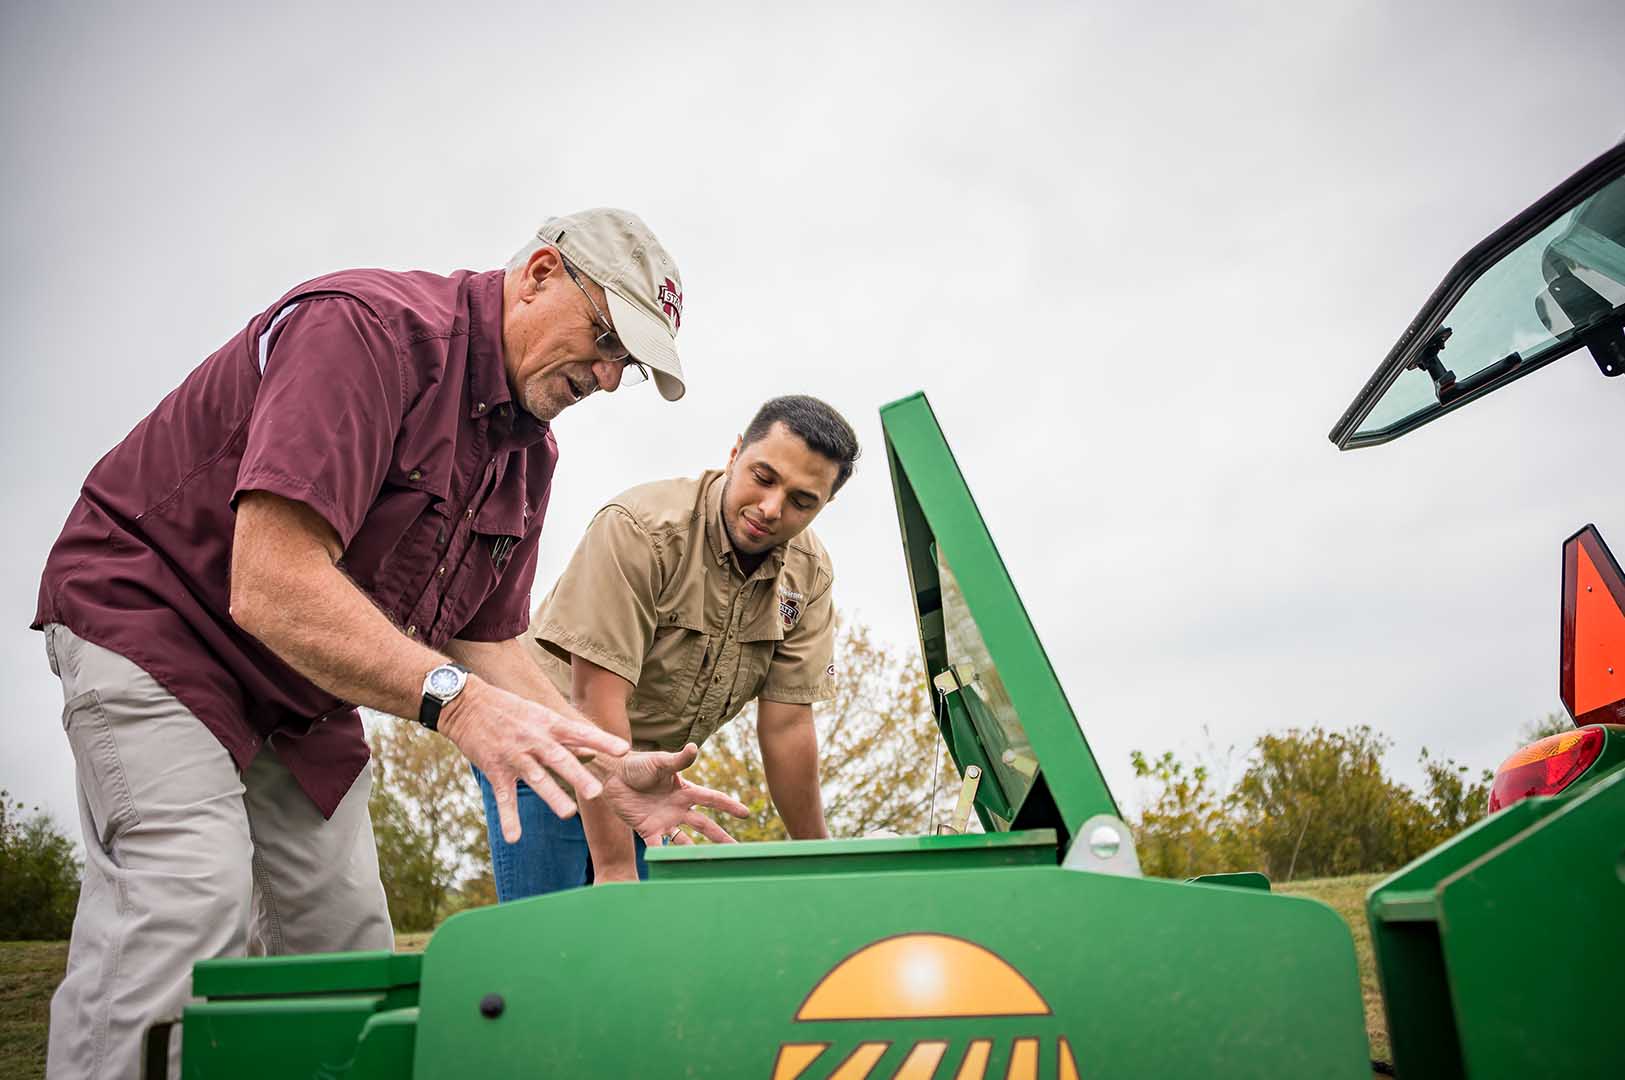 Cover crops are either drilled or broadcasted aerially. Dr. Jac Varco and graduate student Eduardo Garay check out the seed compartment of a drill. (Photo by David Ammon)